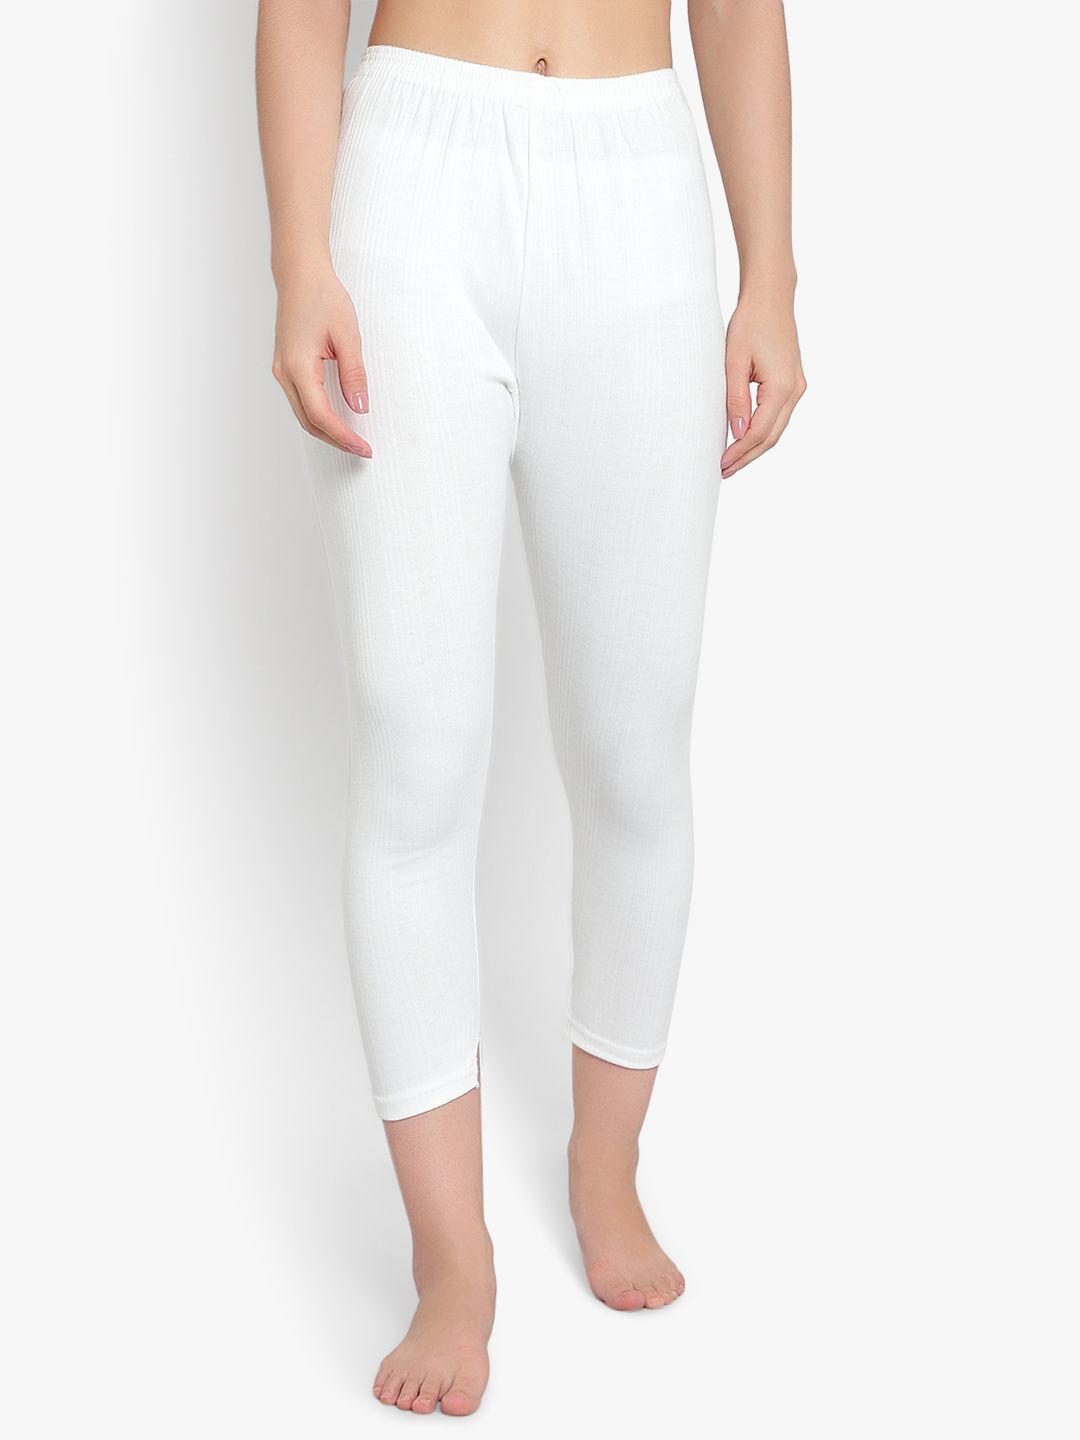 sky heights women white cotton thermal bottoms